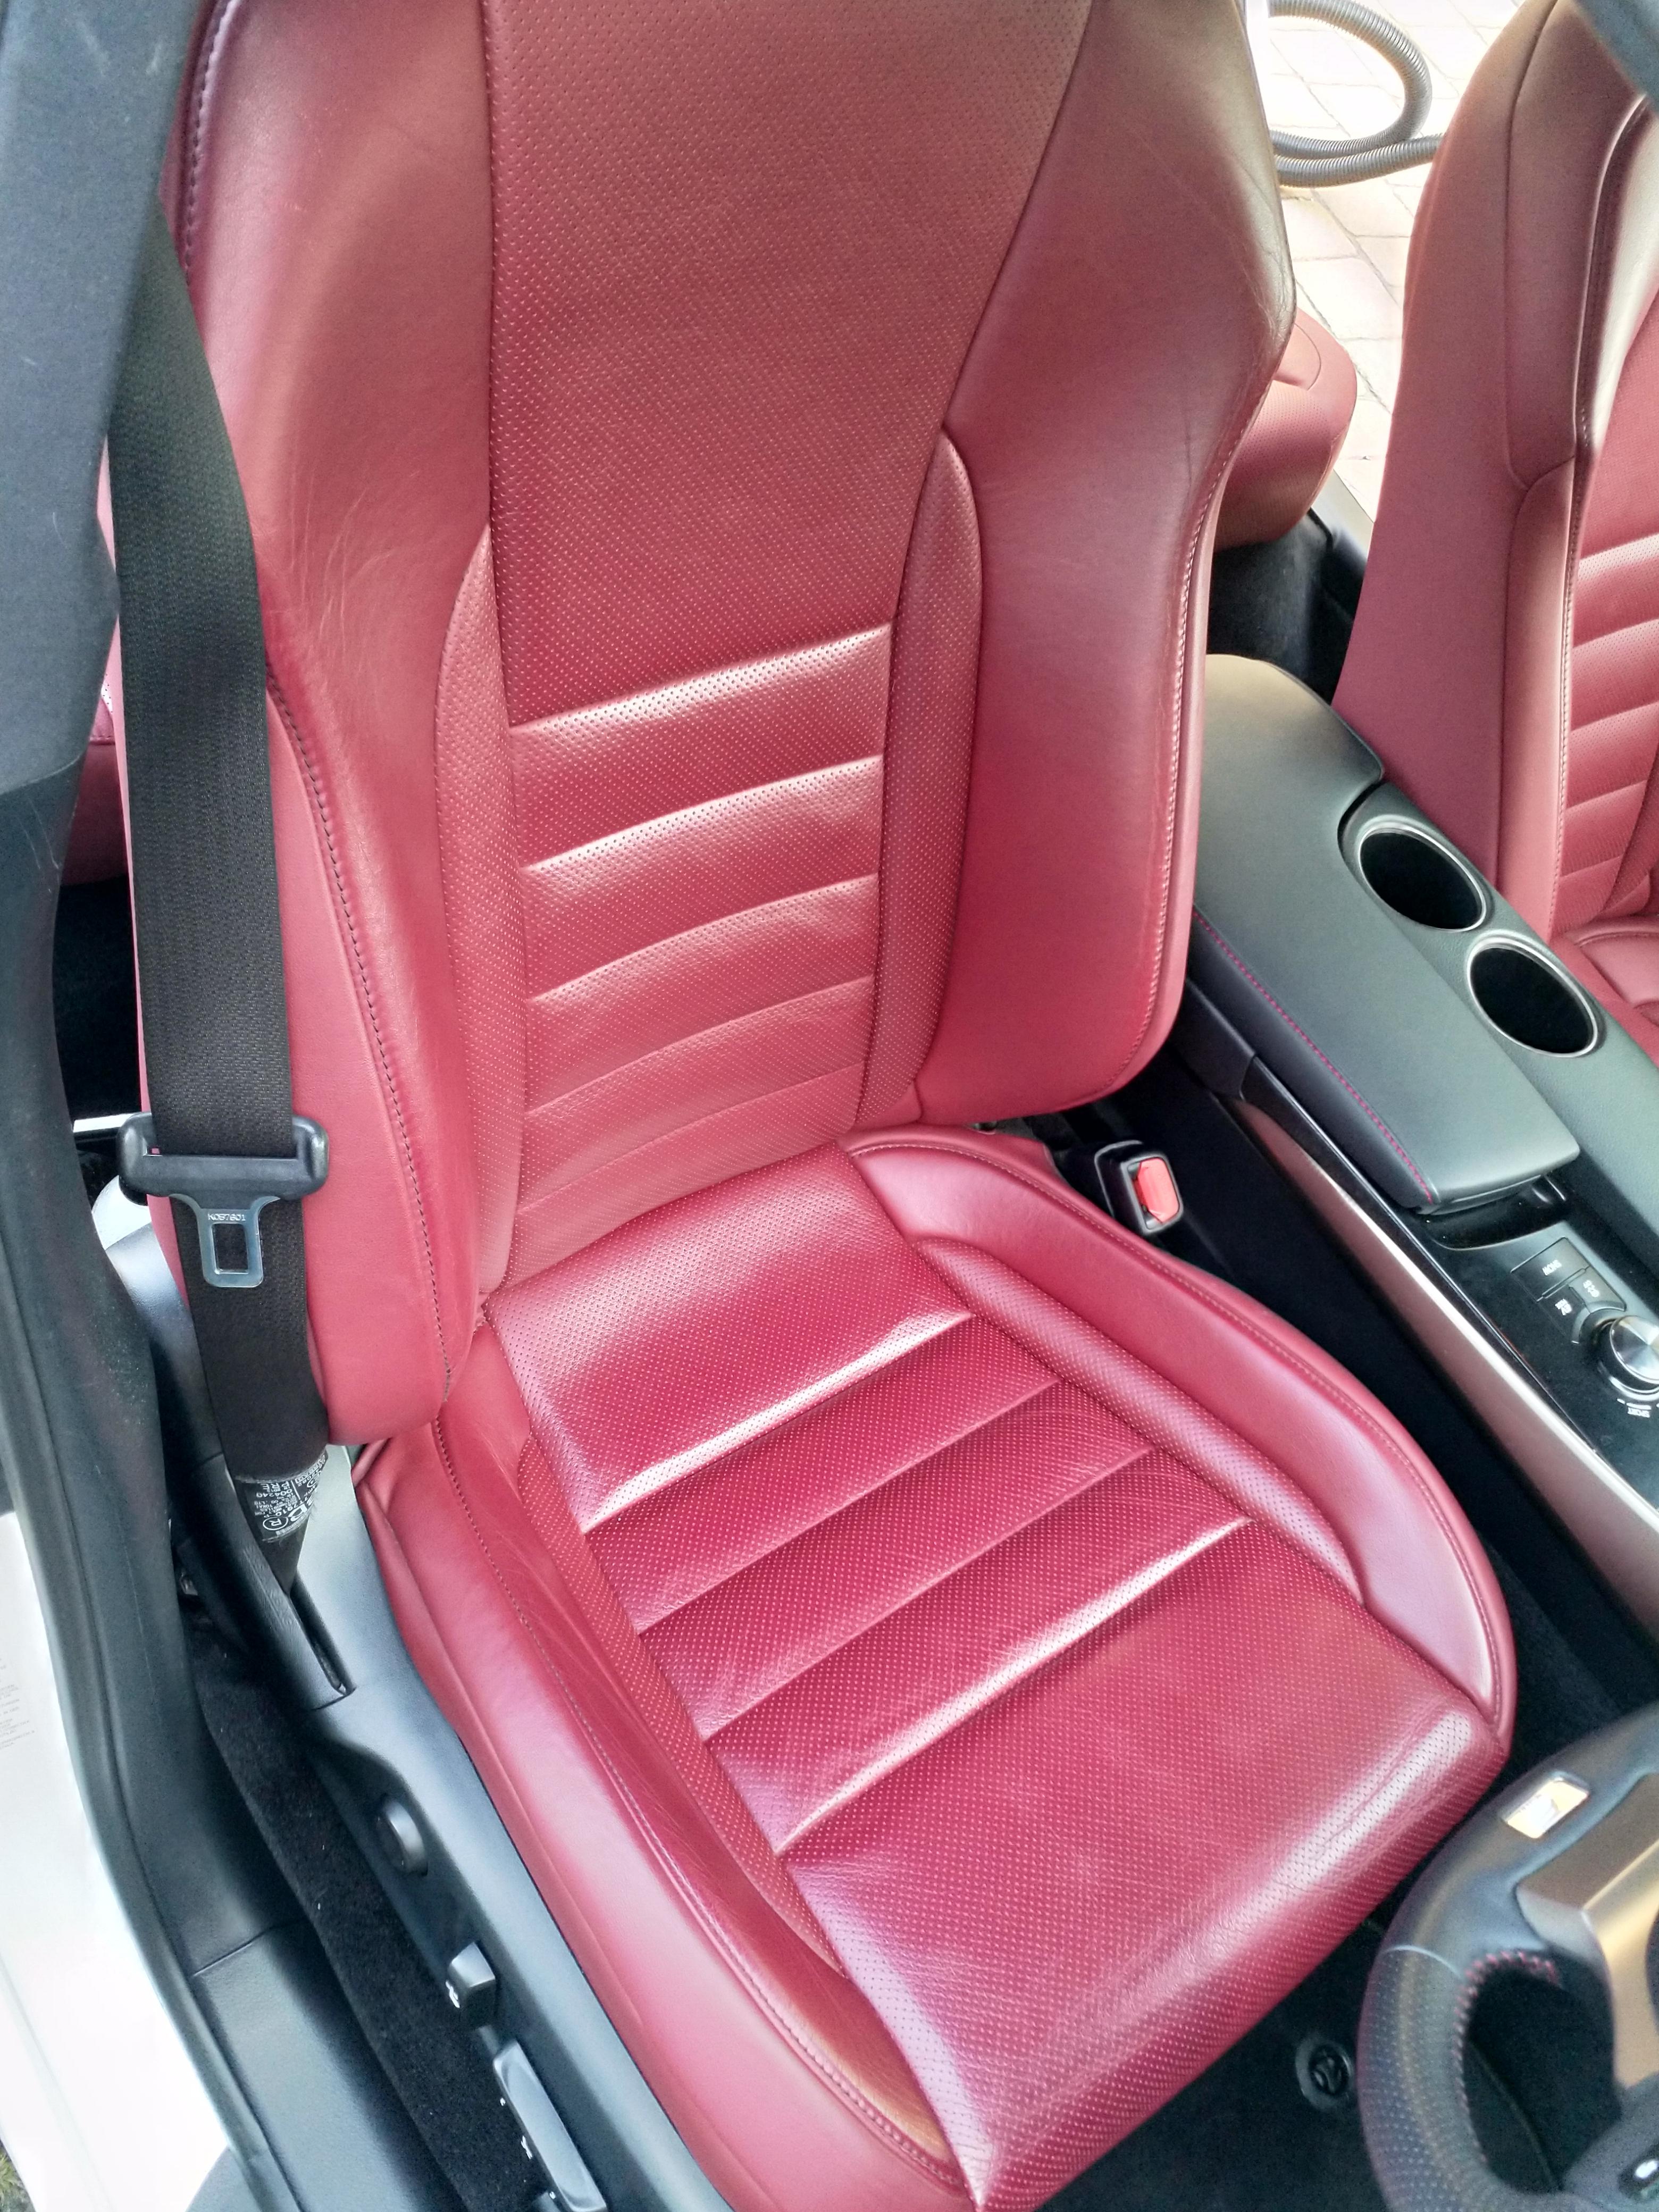 Leather Seat Clean Is300h F Sport Lexus Car Care Detailing Owners Club - How To Clean Lexus Leather Car Seats